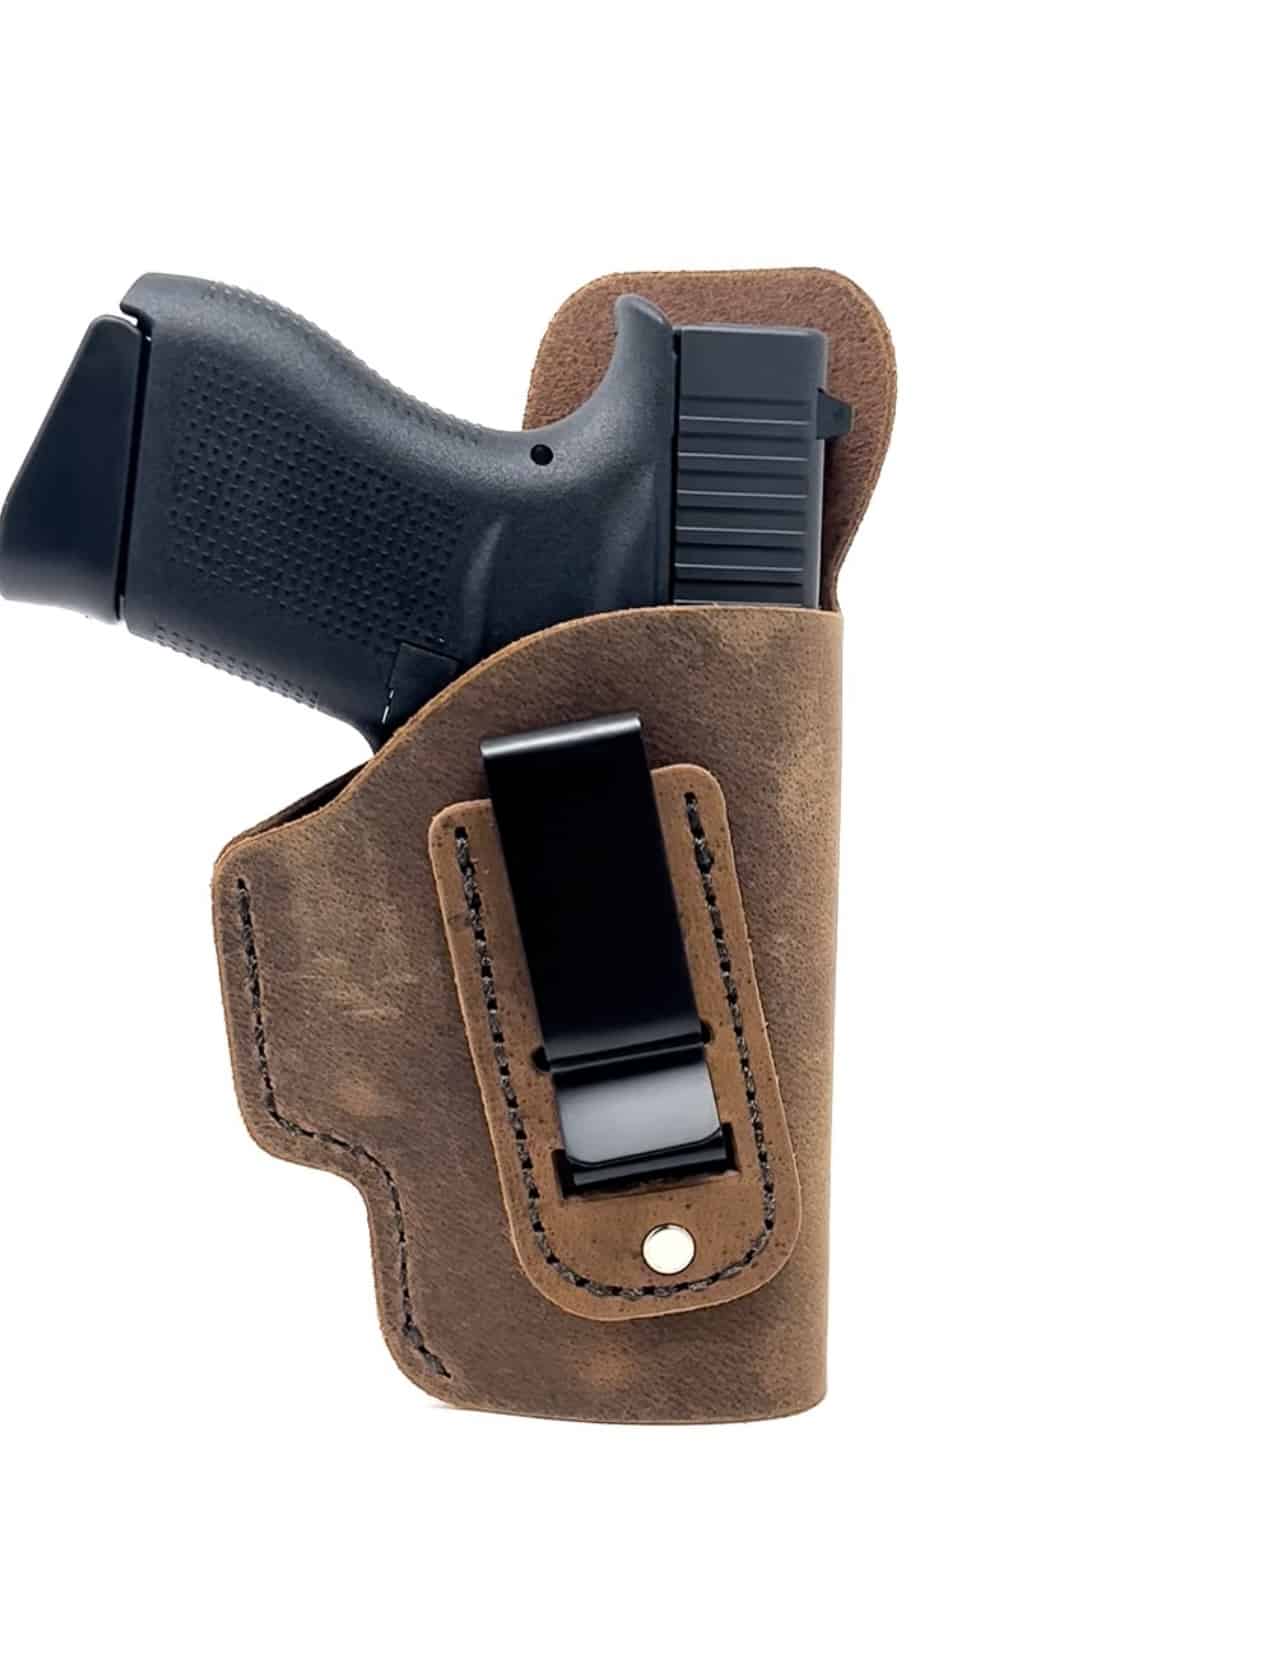 XTREME CARRY RH LH IWB Leather Gun Holster For CZ 75 Compact 